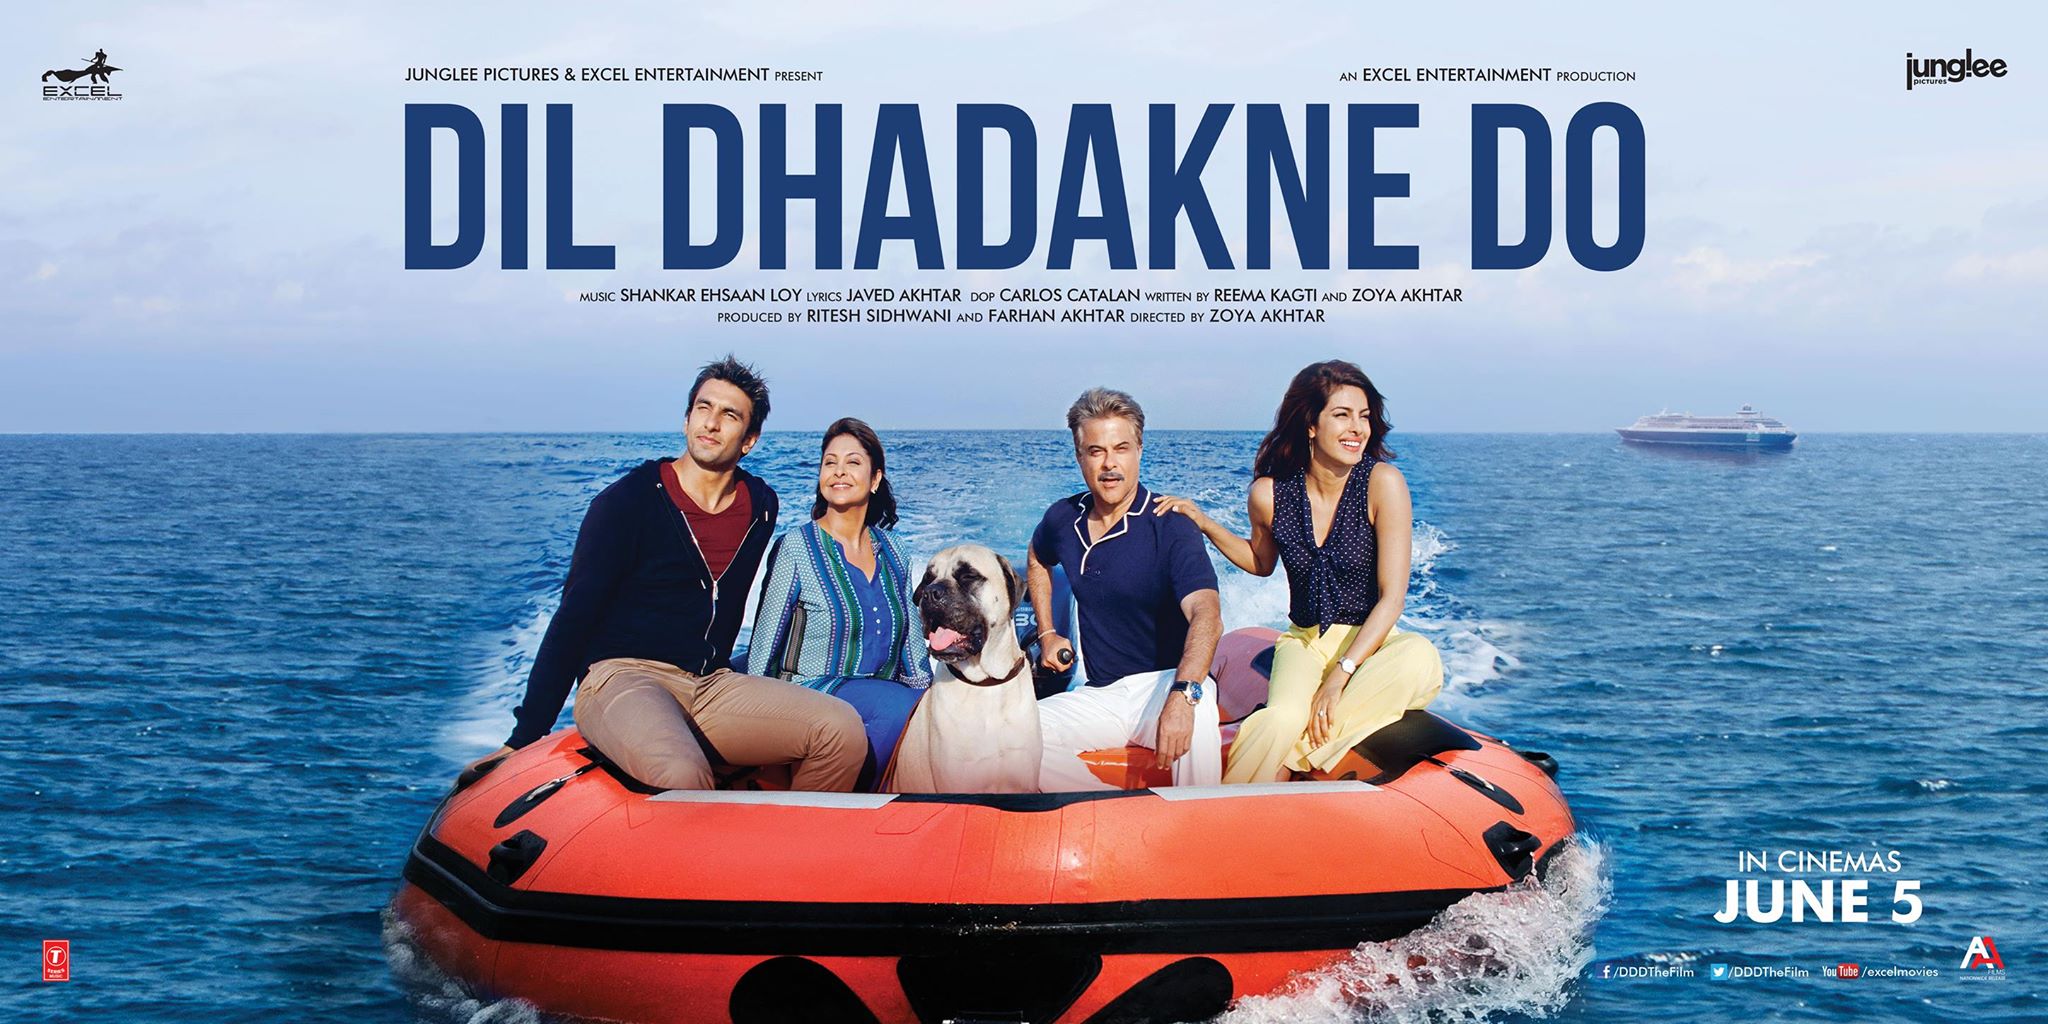 where to watch dil dhadakne do online